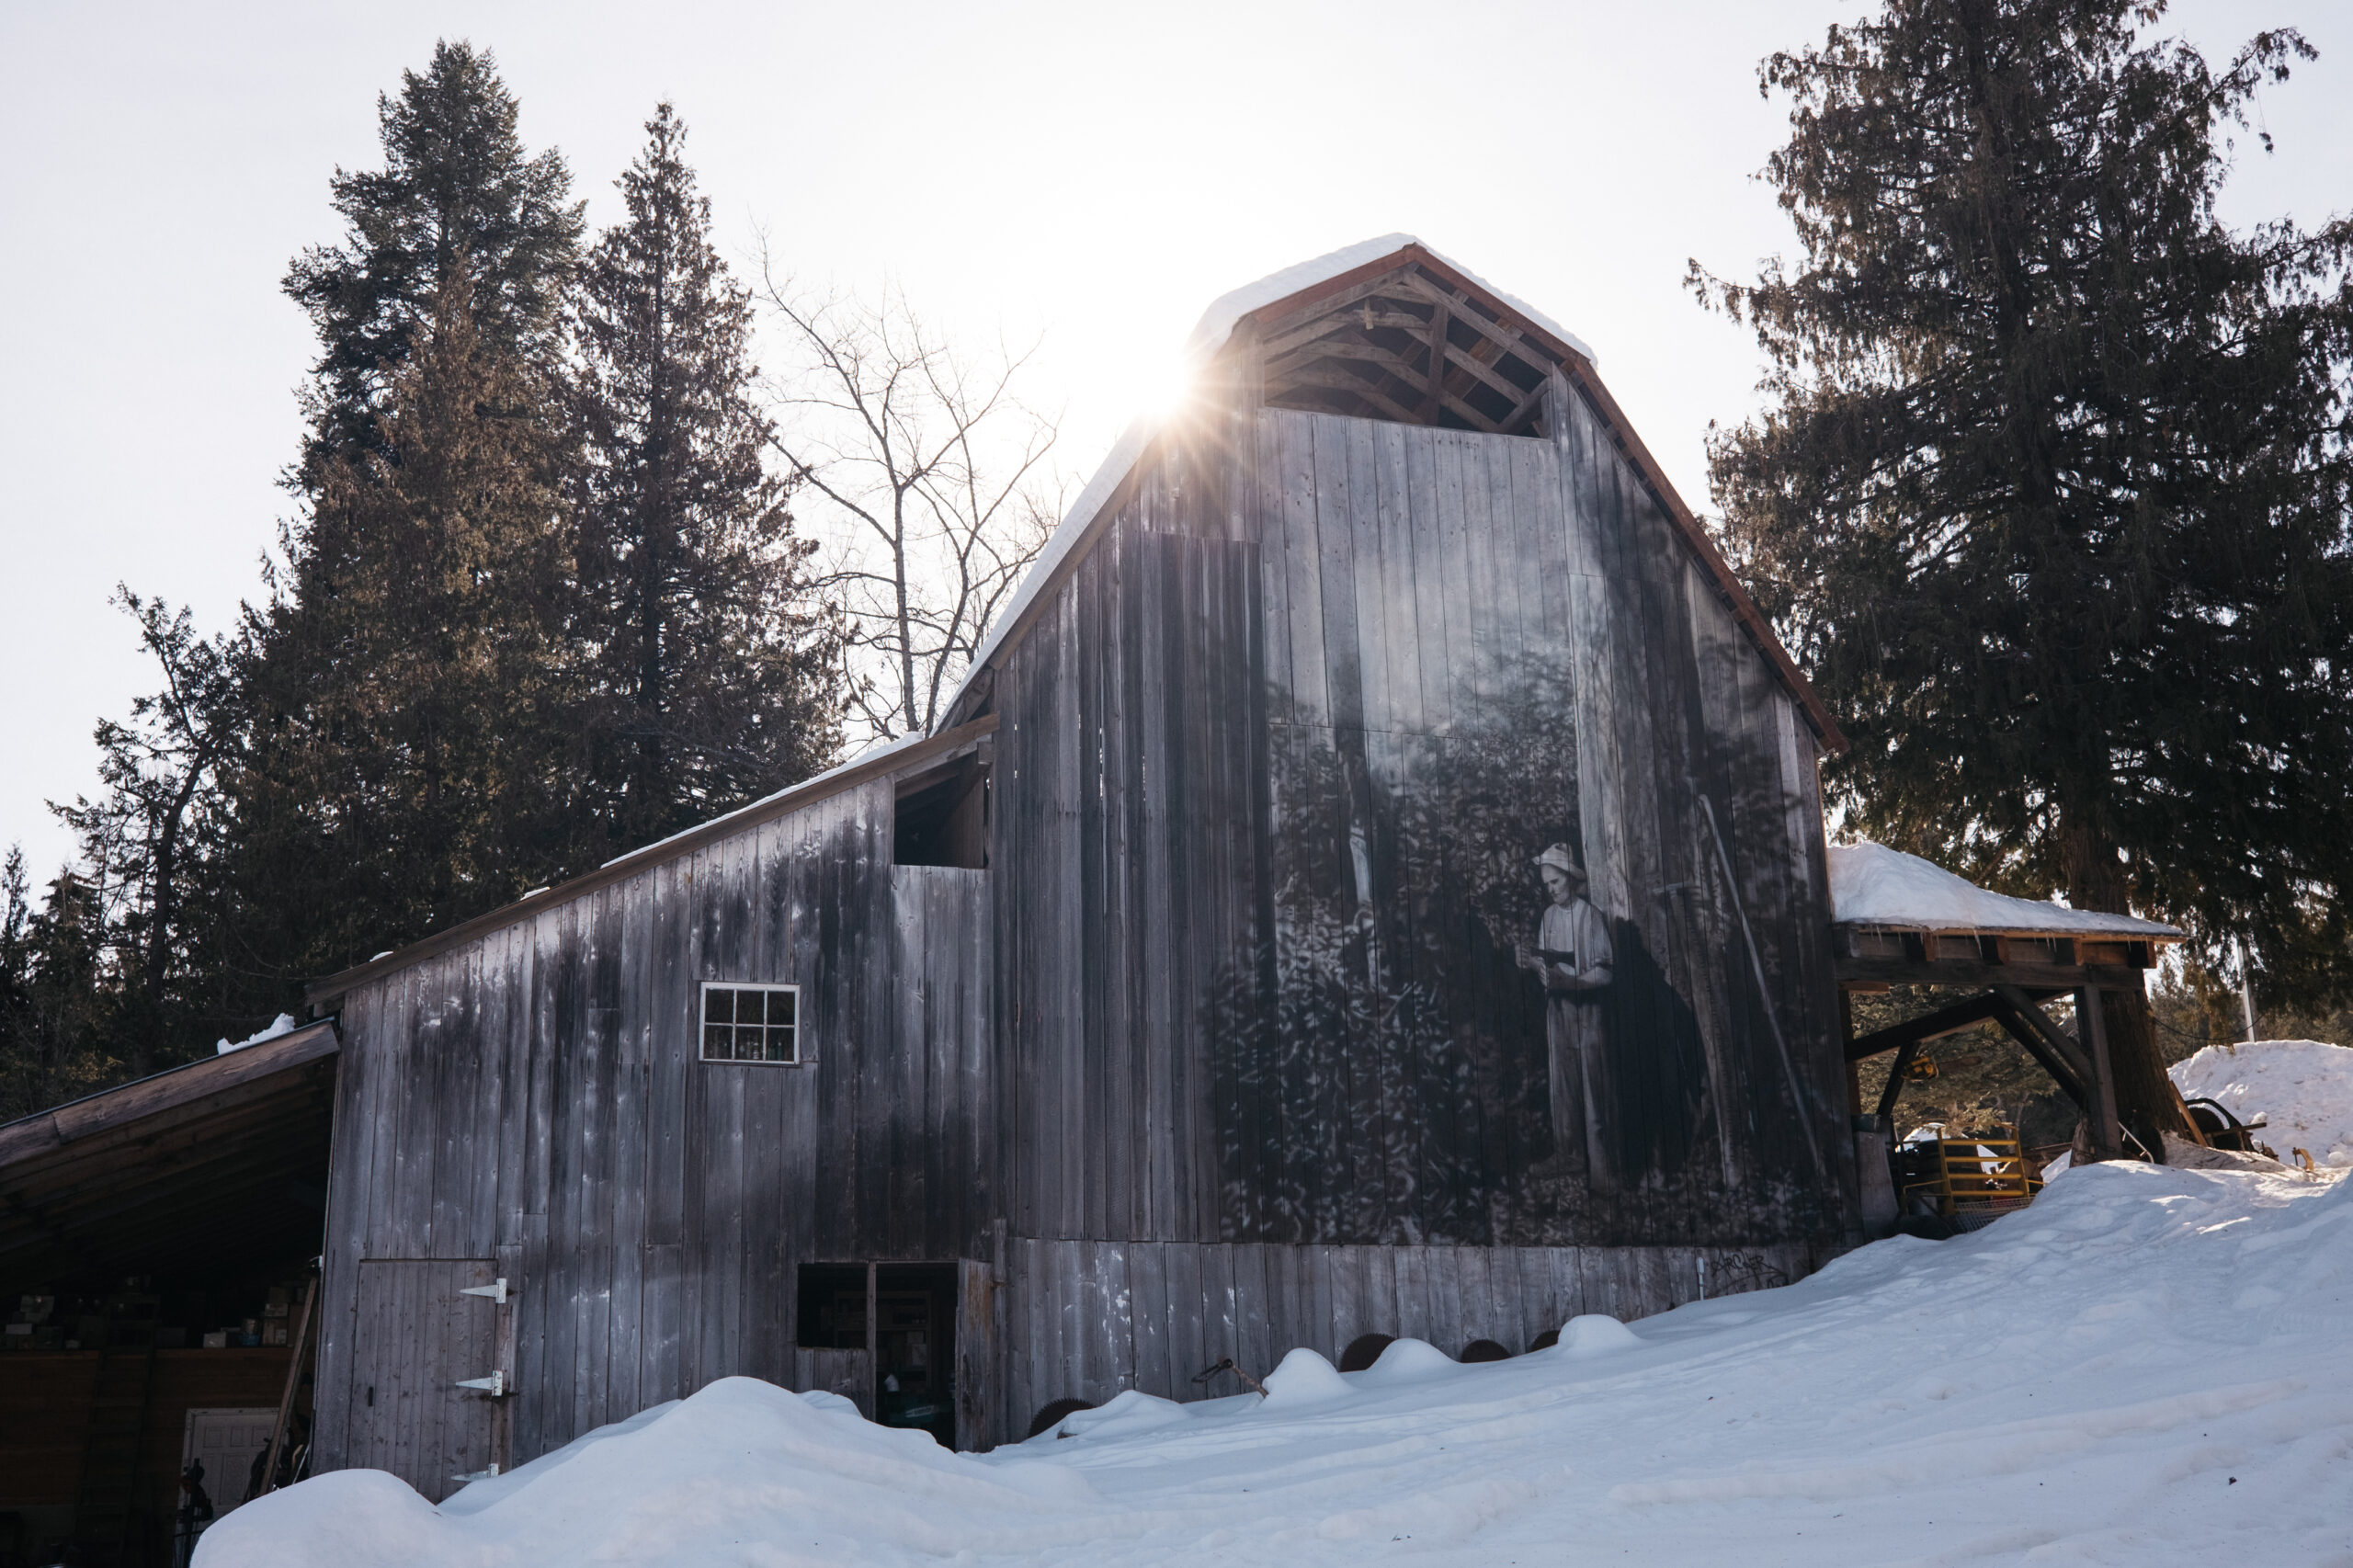 A mural on the barn where Son Ranch Timber Co.'s logging museum is housed shows the homestead's original owner, KP Dondale, holding a double-bit axe while other logging equipment leans against a tree.